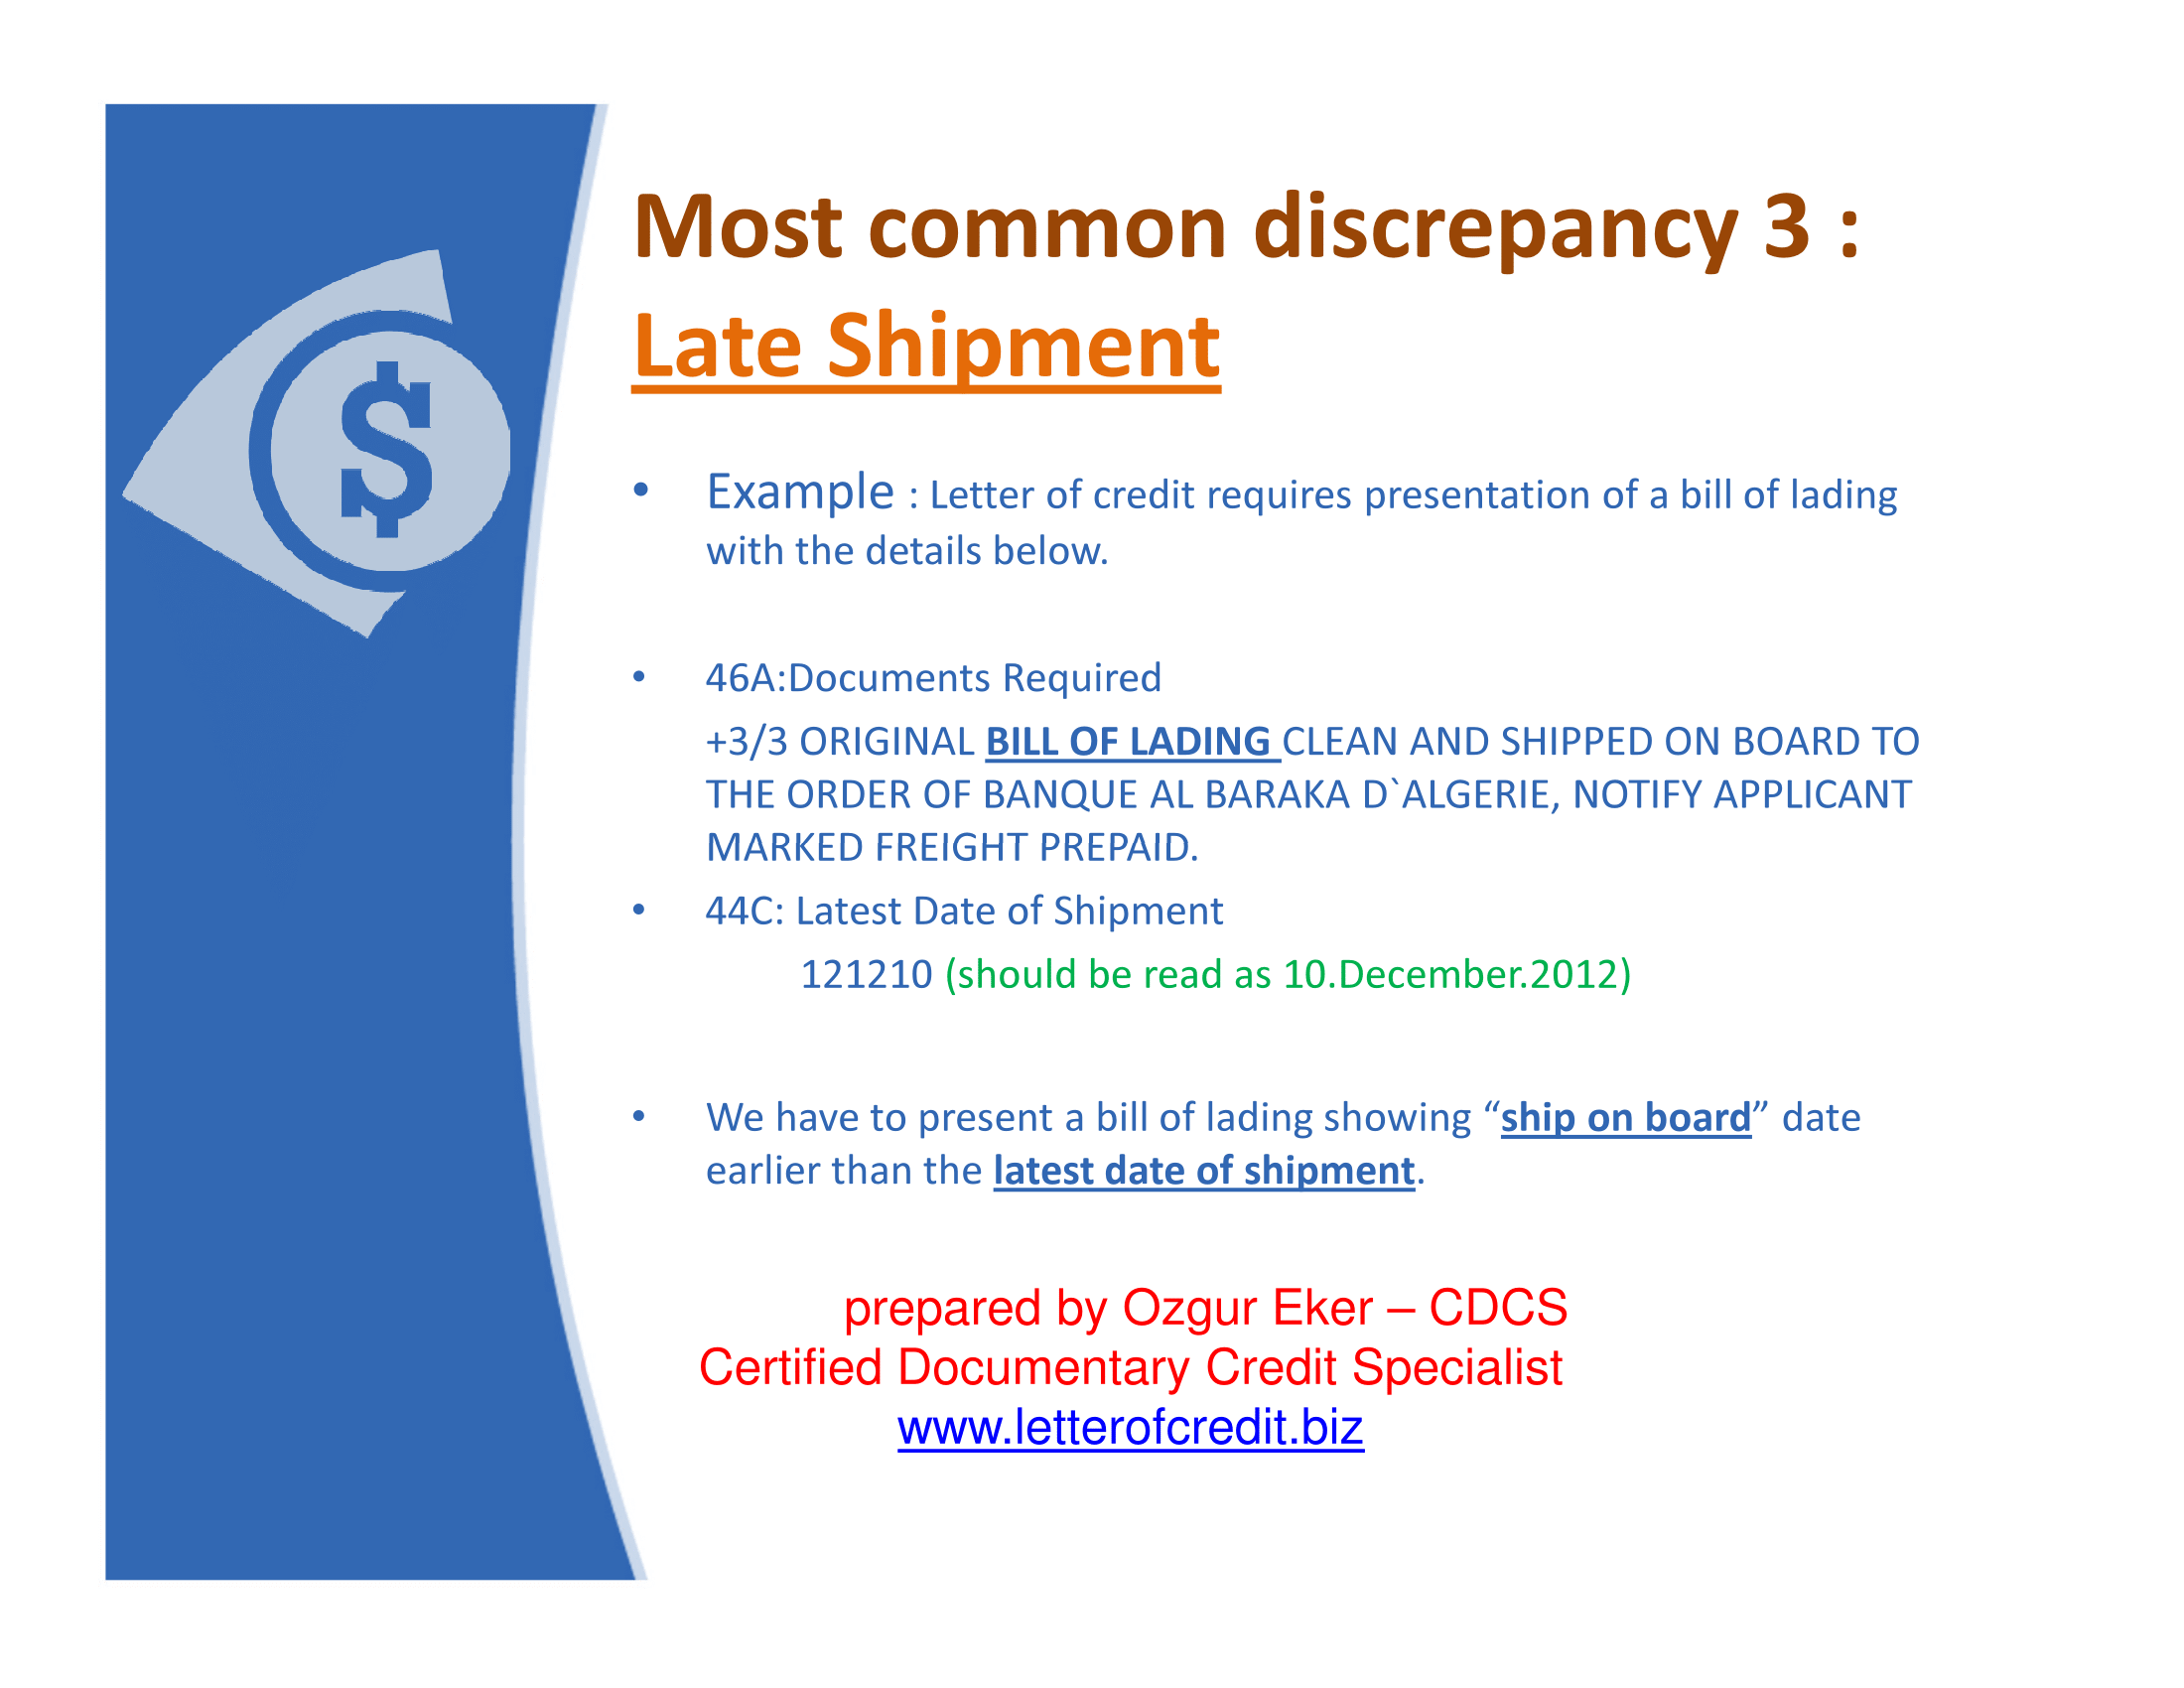 late shipment example